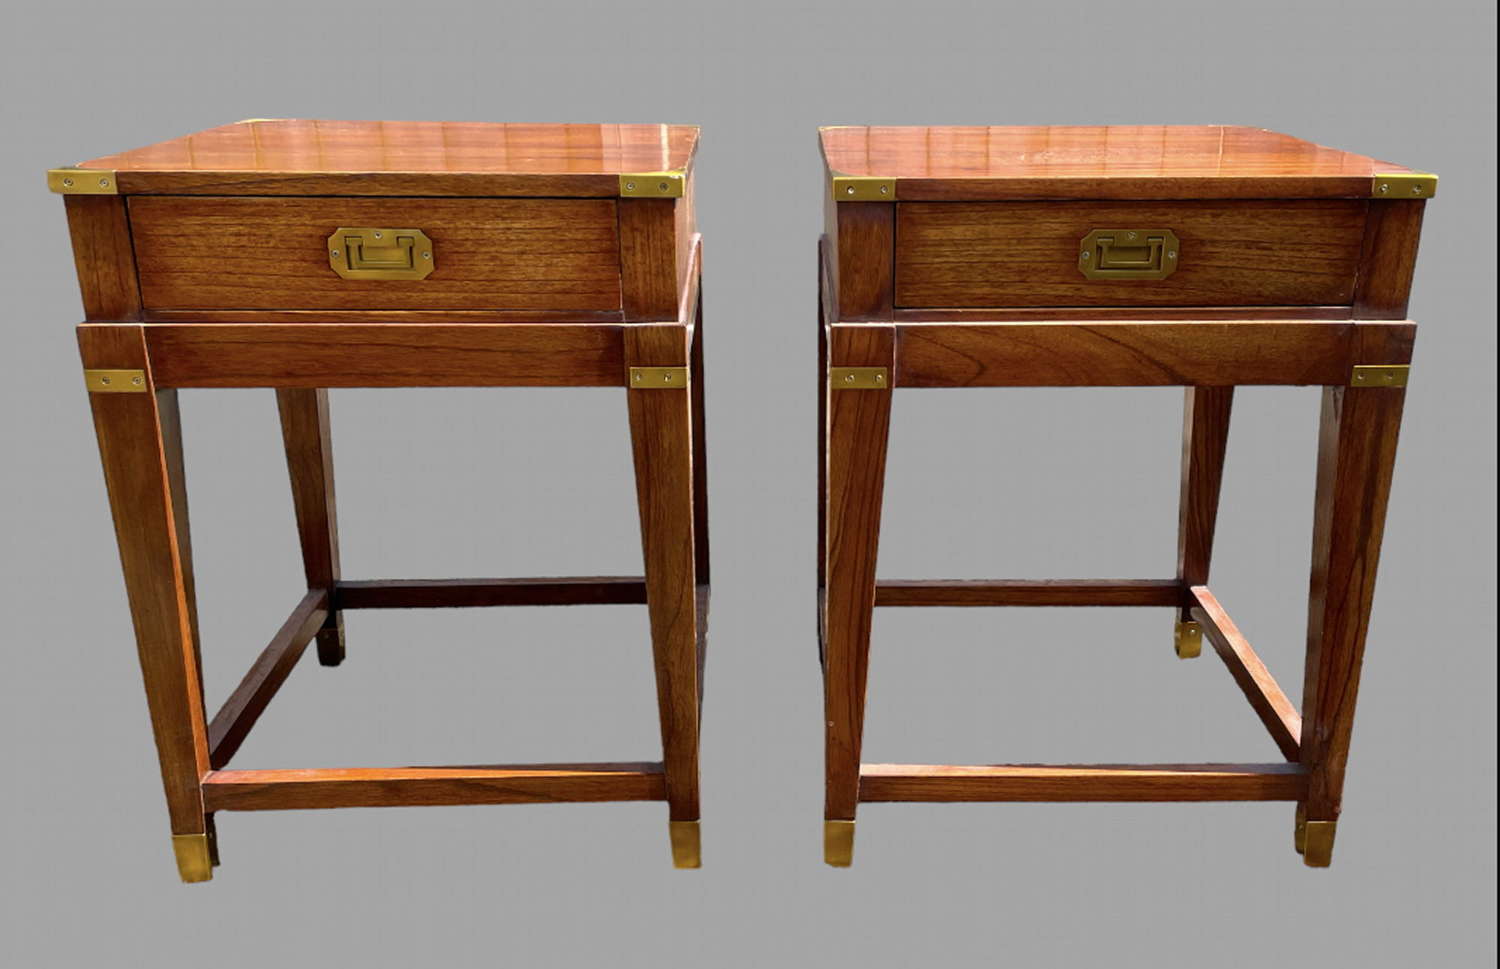 A pair of Campaign Style Bedsides